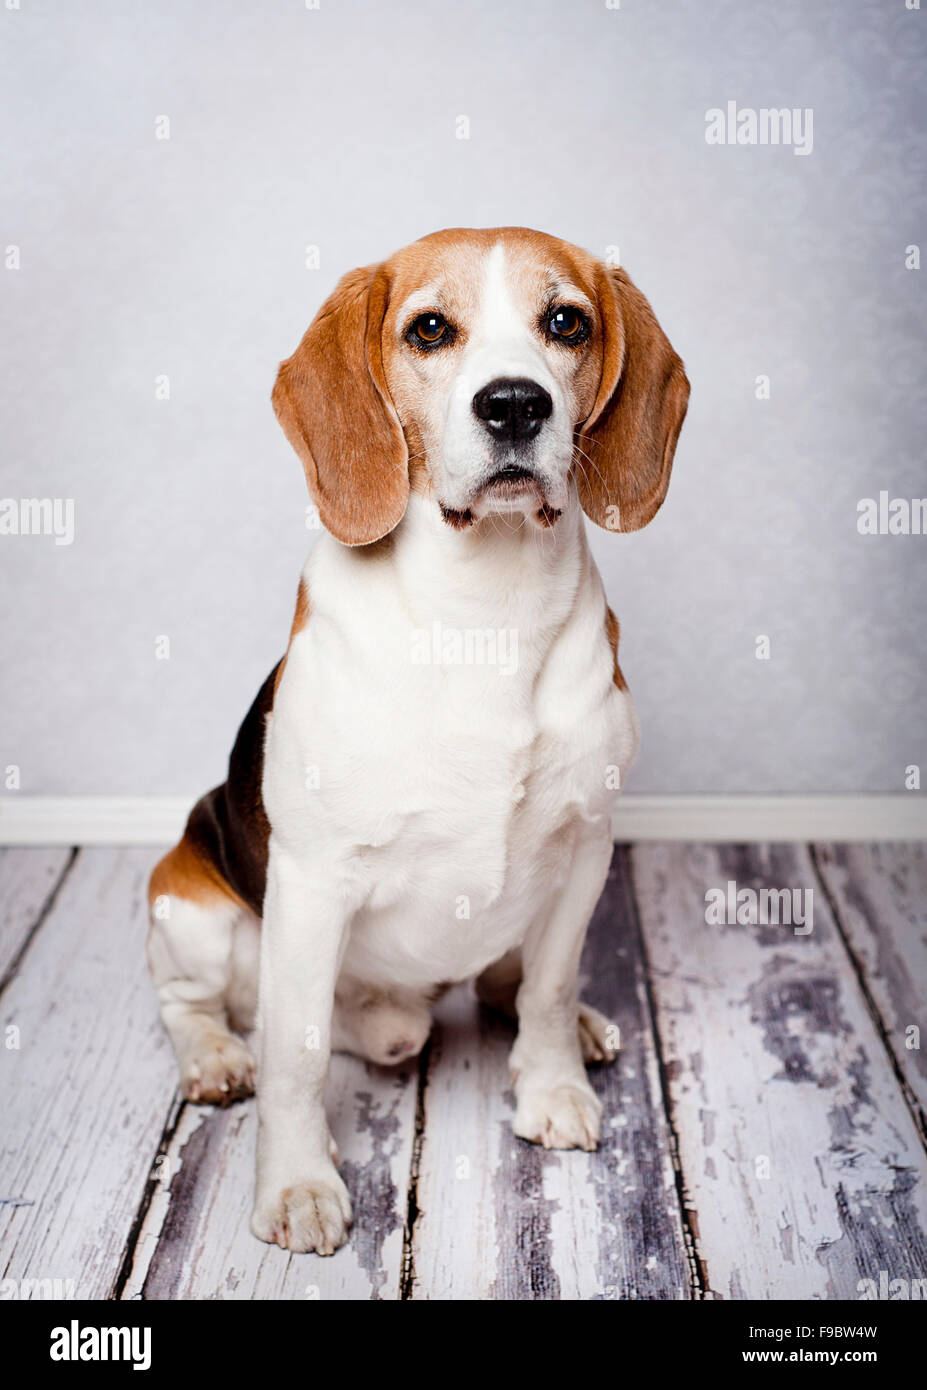 Cute hunting dog  portrait on wooden floor Stock Photo